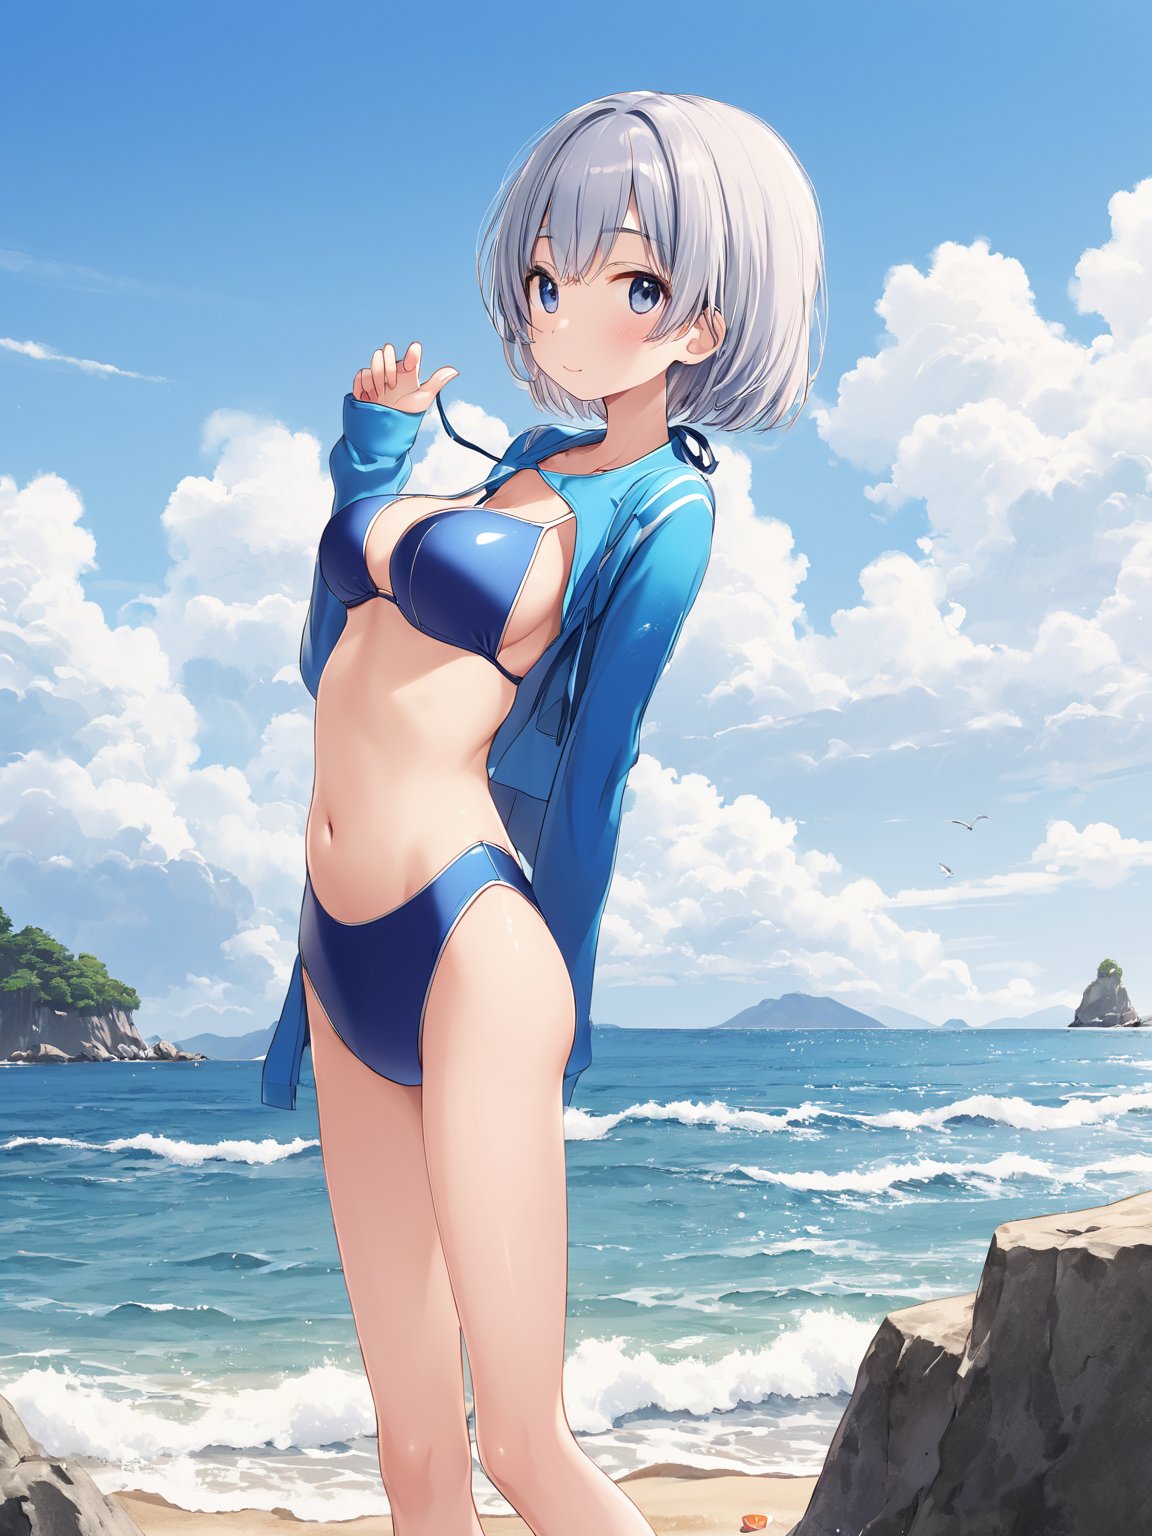 //Quality,
masterpiece, best quality, ultra detailed, 8K-UHD
,//Character,
1girl, solo
,//Fashion,
swim_suit
,//Background,
sky, outdoor, seaside
,//Others,
,SakuyaTsuitachiStyle